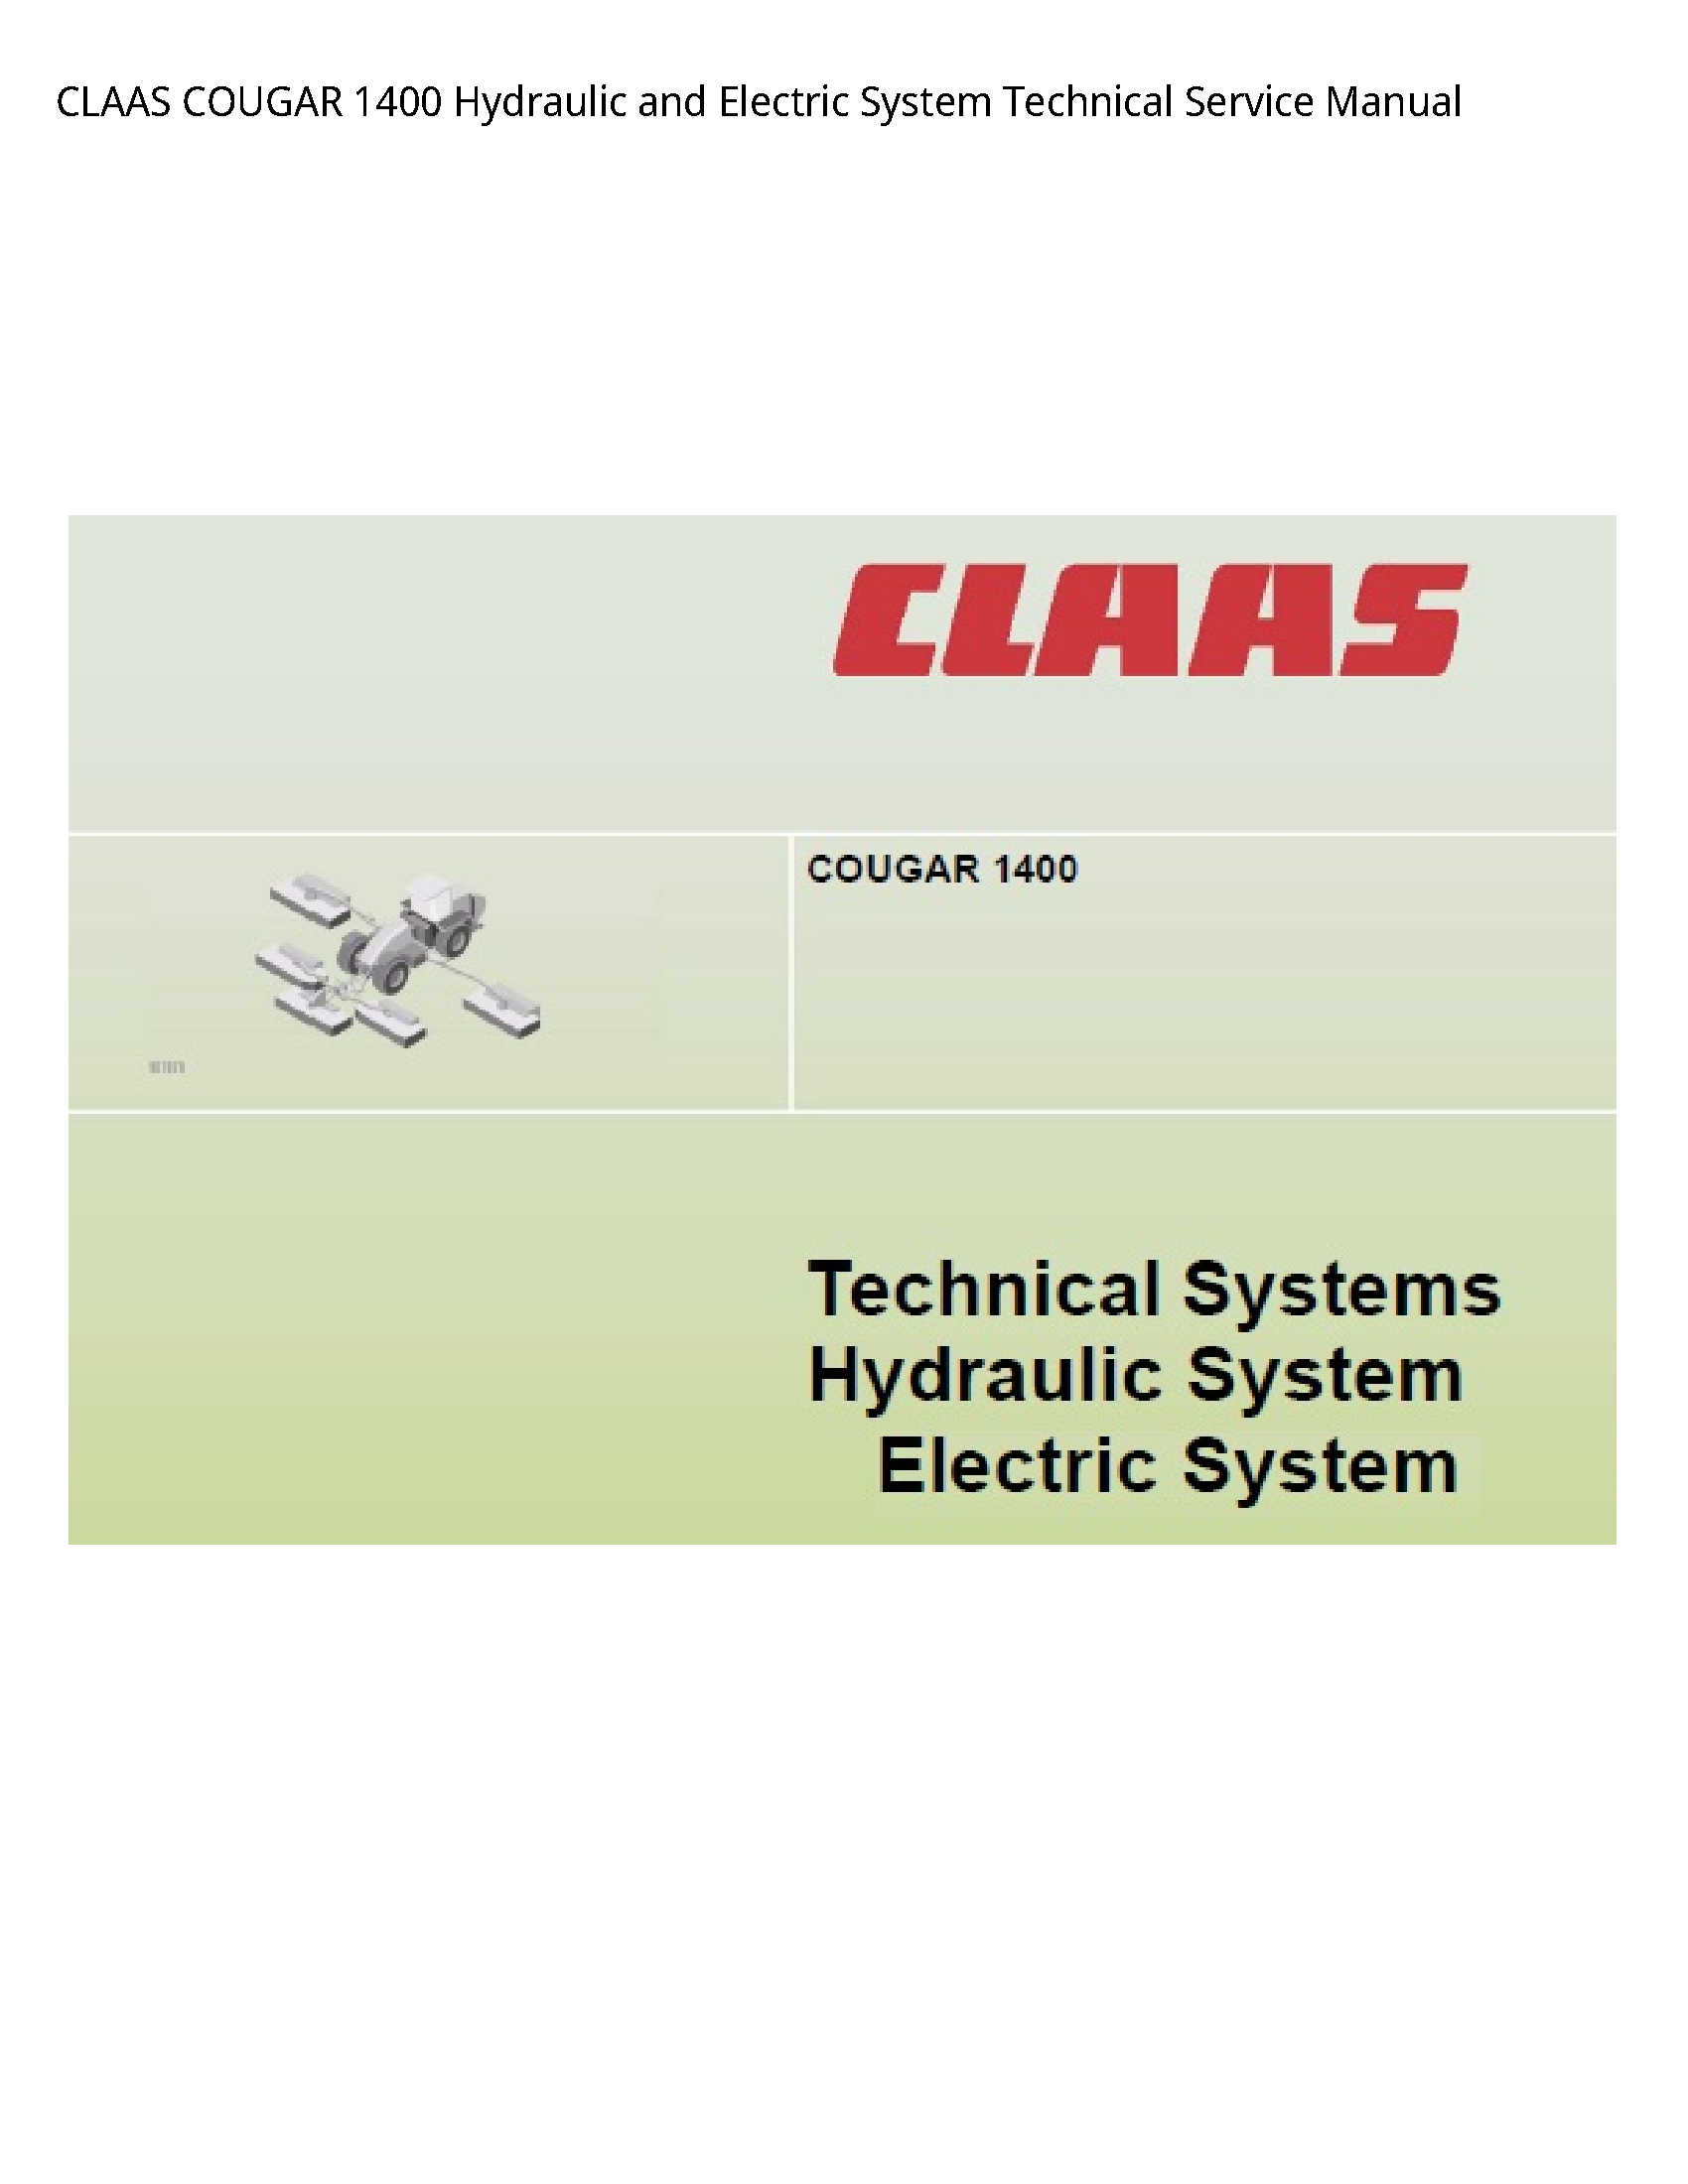 Claas 1400 COUGAR Hydraulic  Electric System Technical Service manual